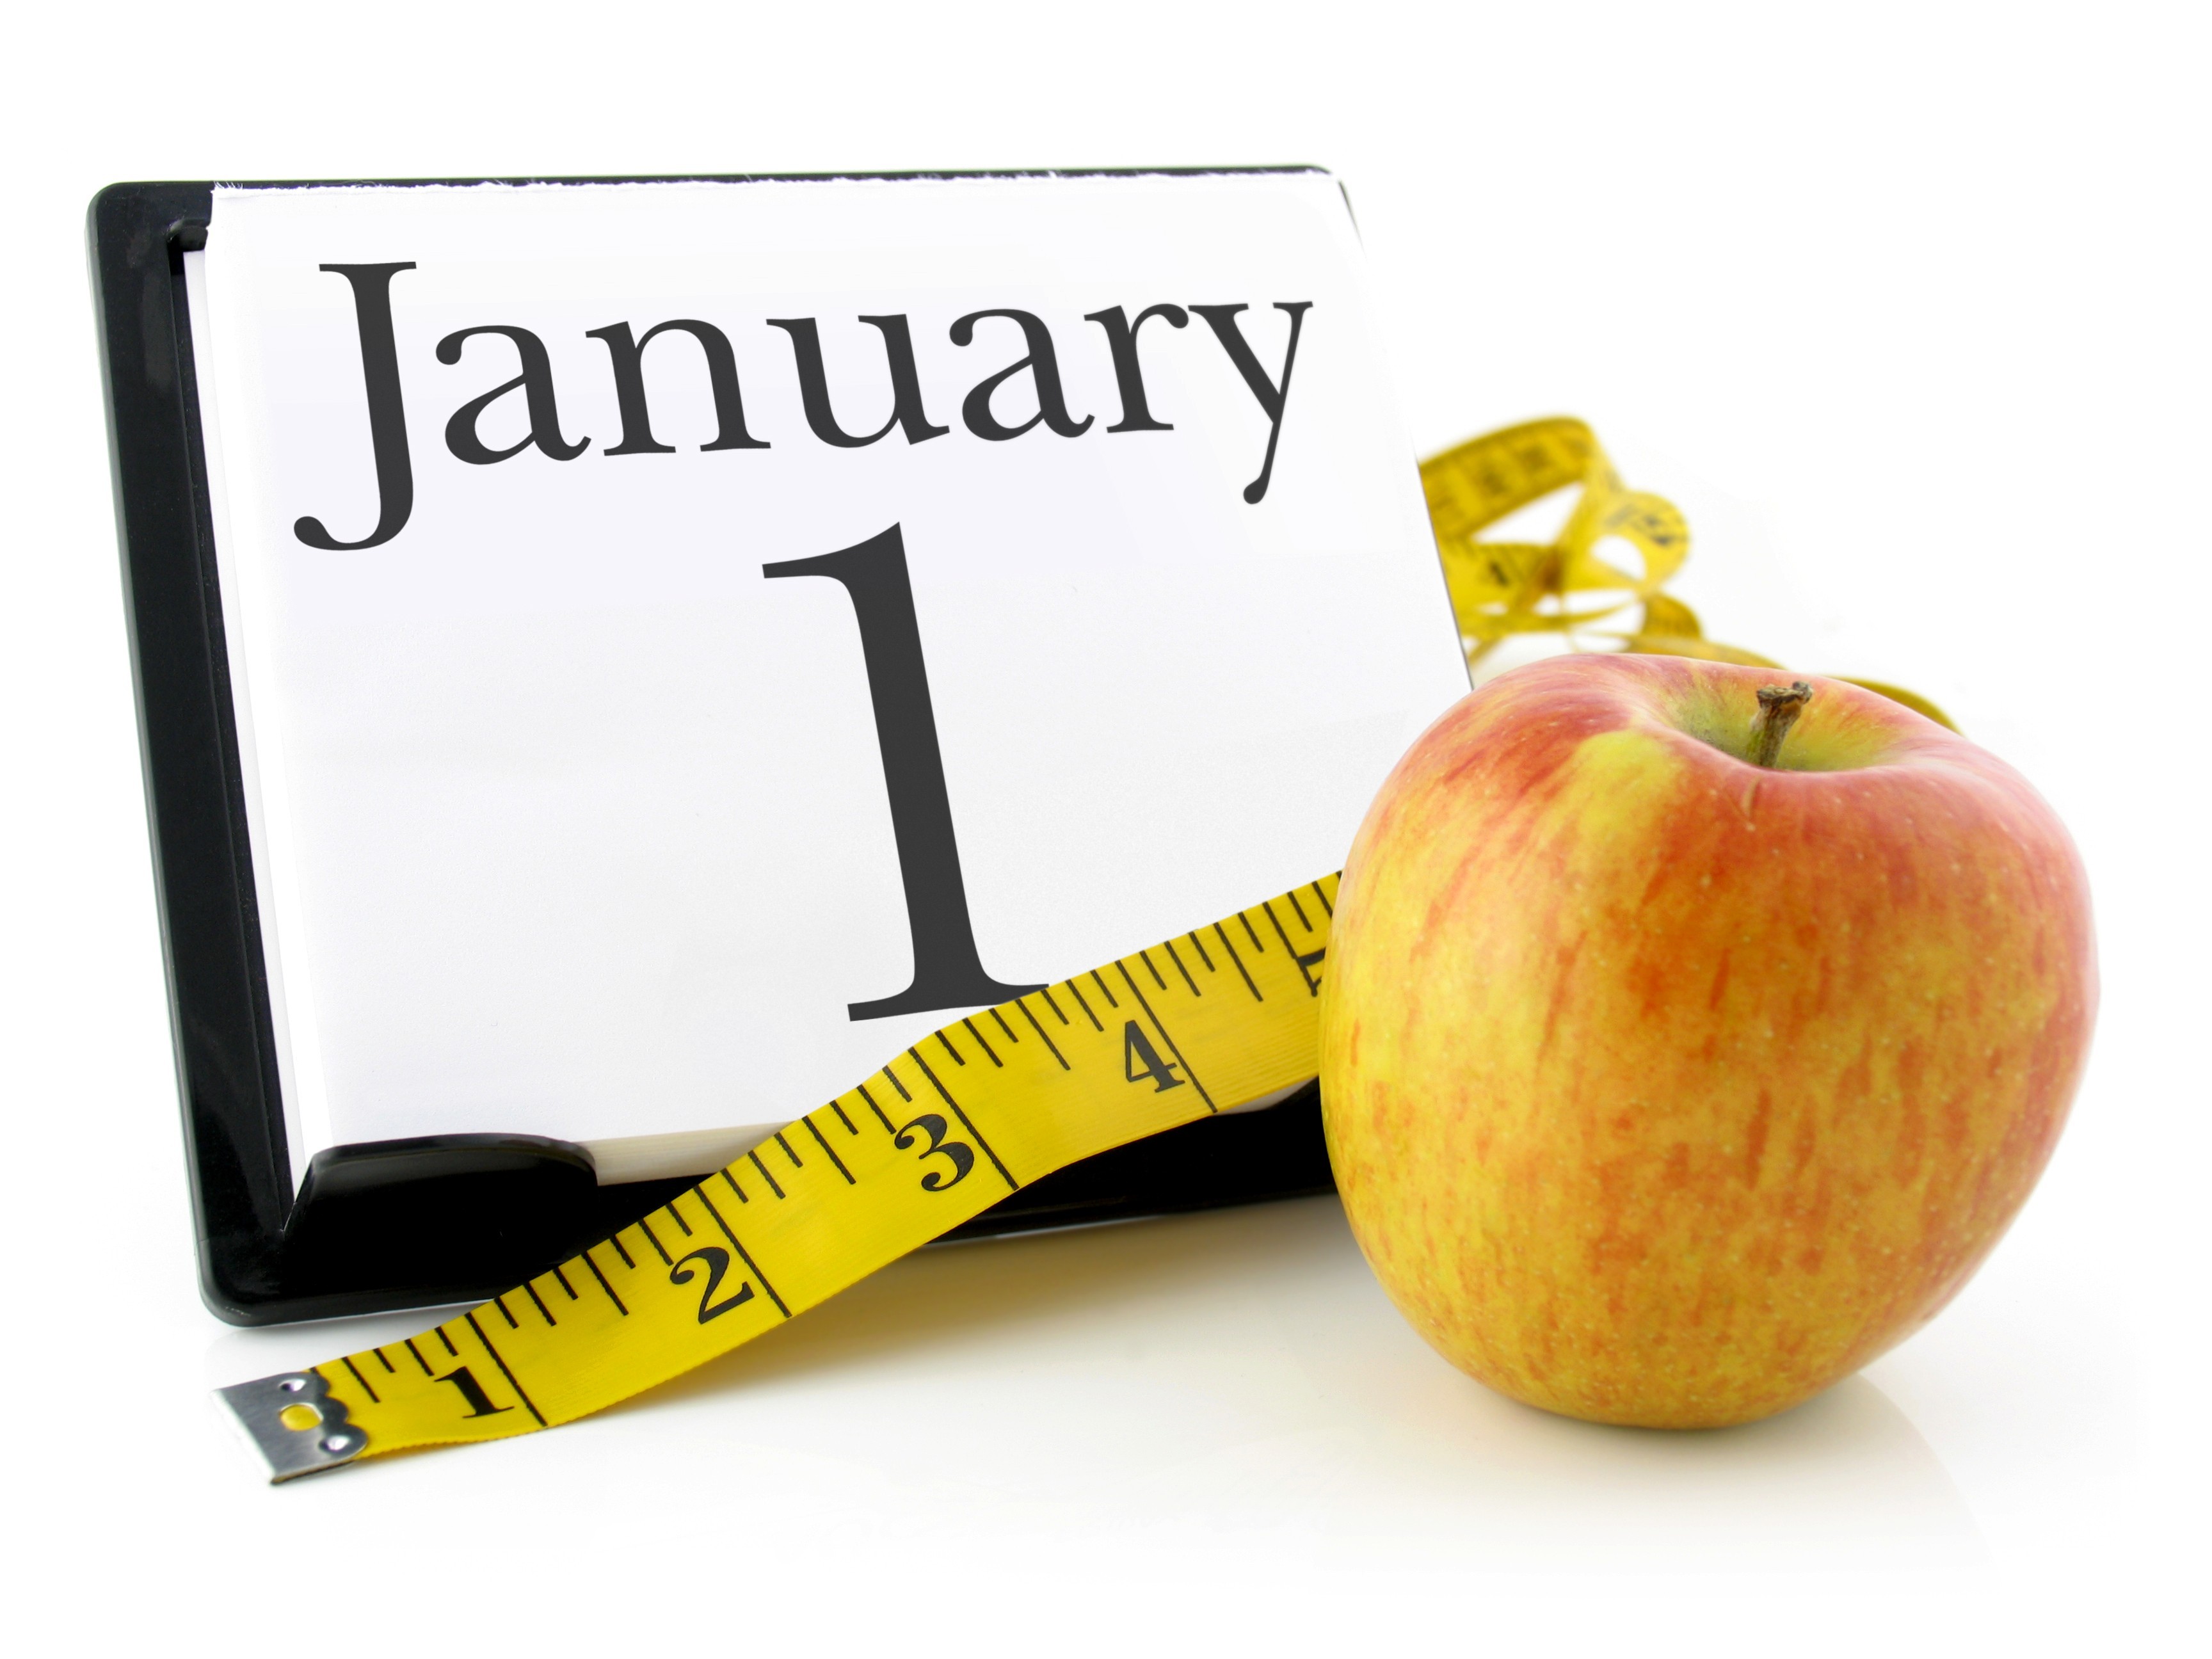 Worth making new year resolutions towards your Health